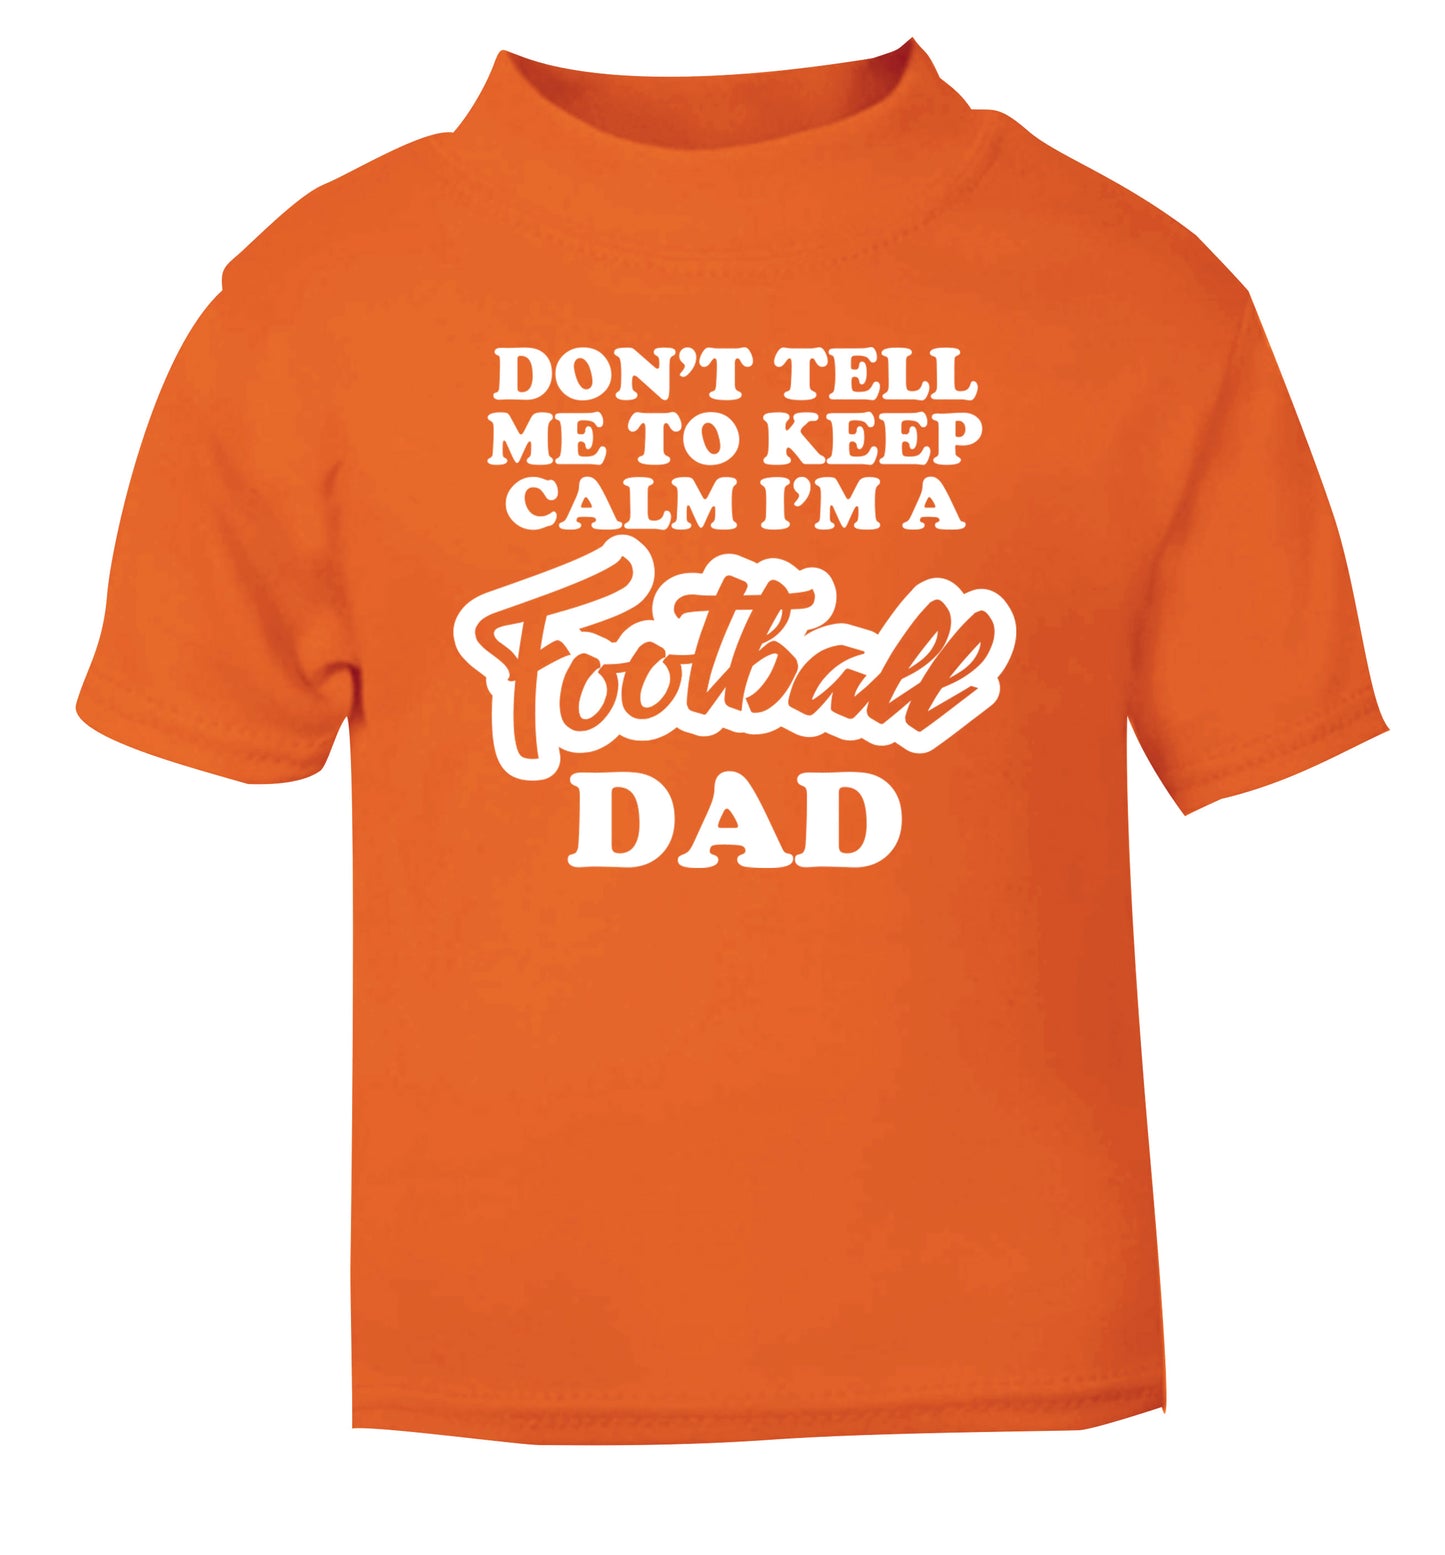 Don't tell me to keep calm I'm a football dad orange Baby Toddler Tshirt 2 Years